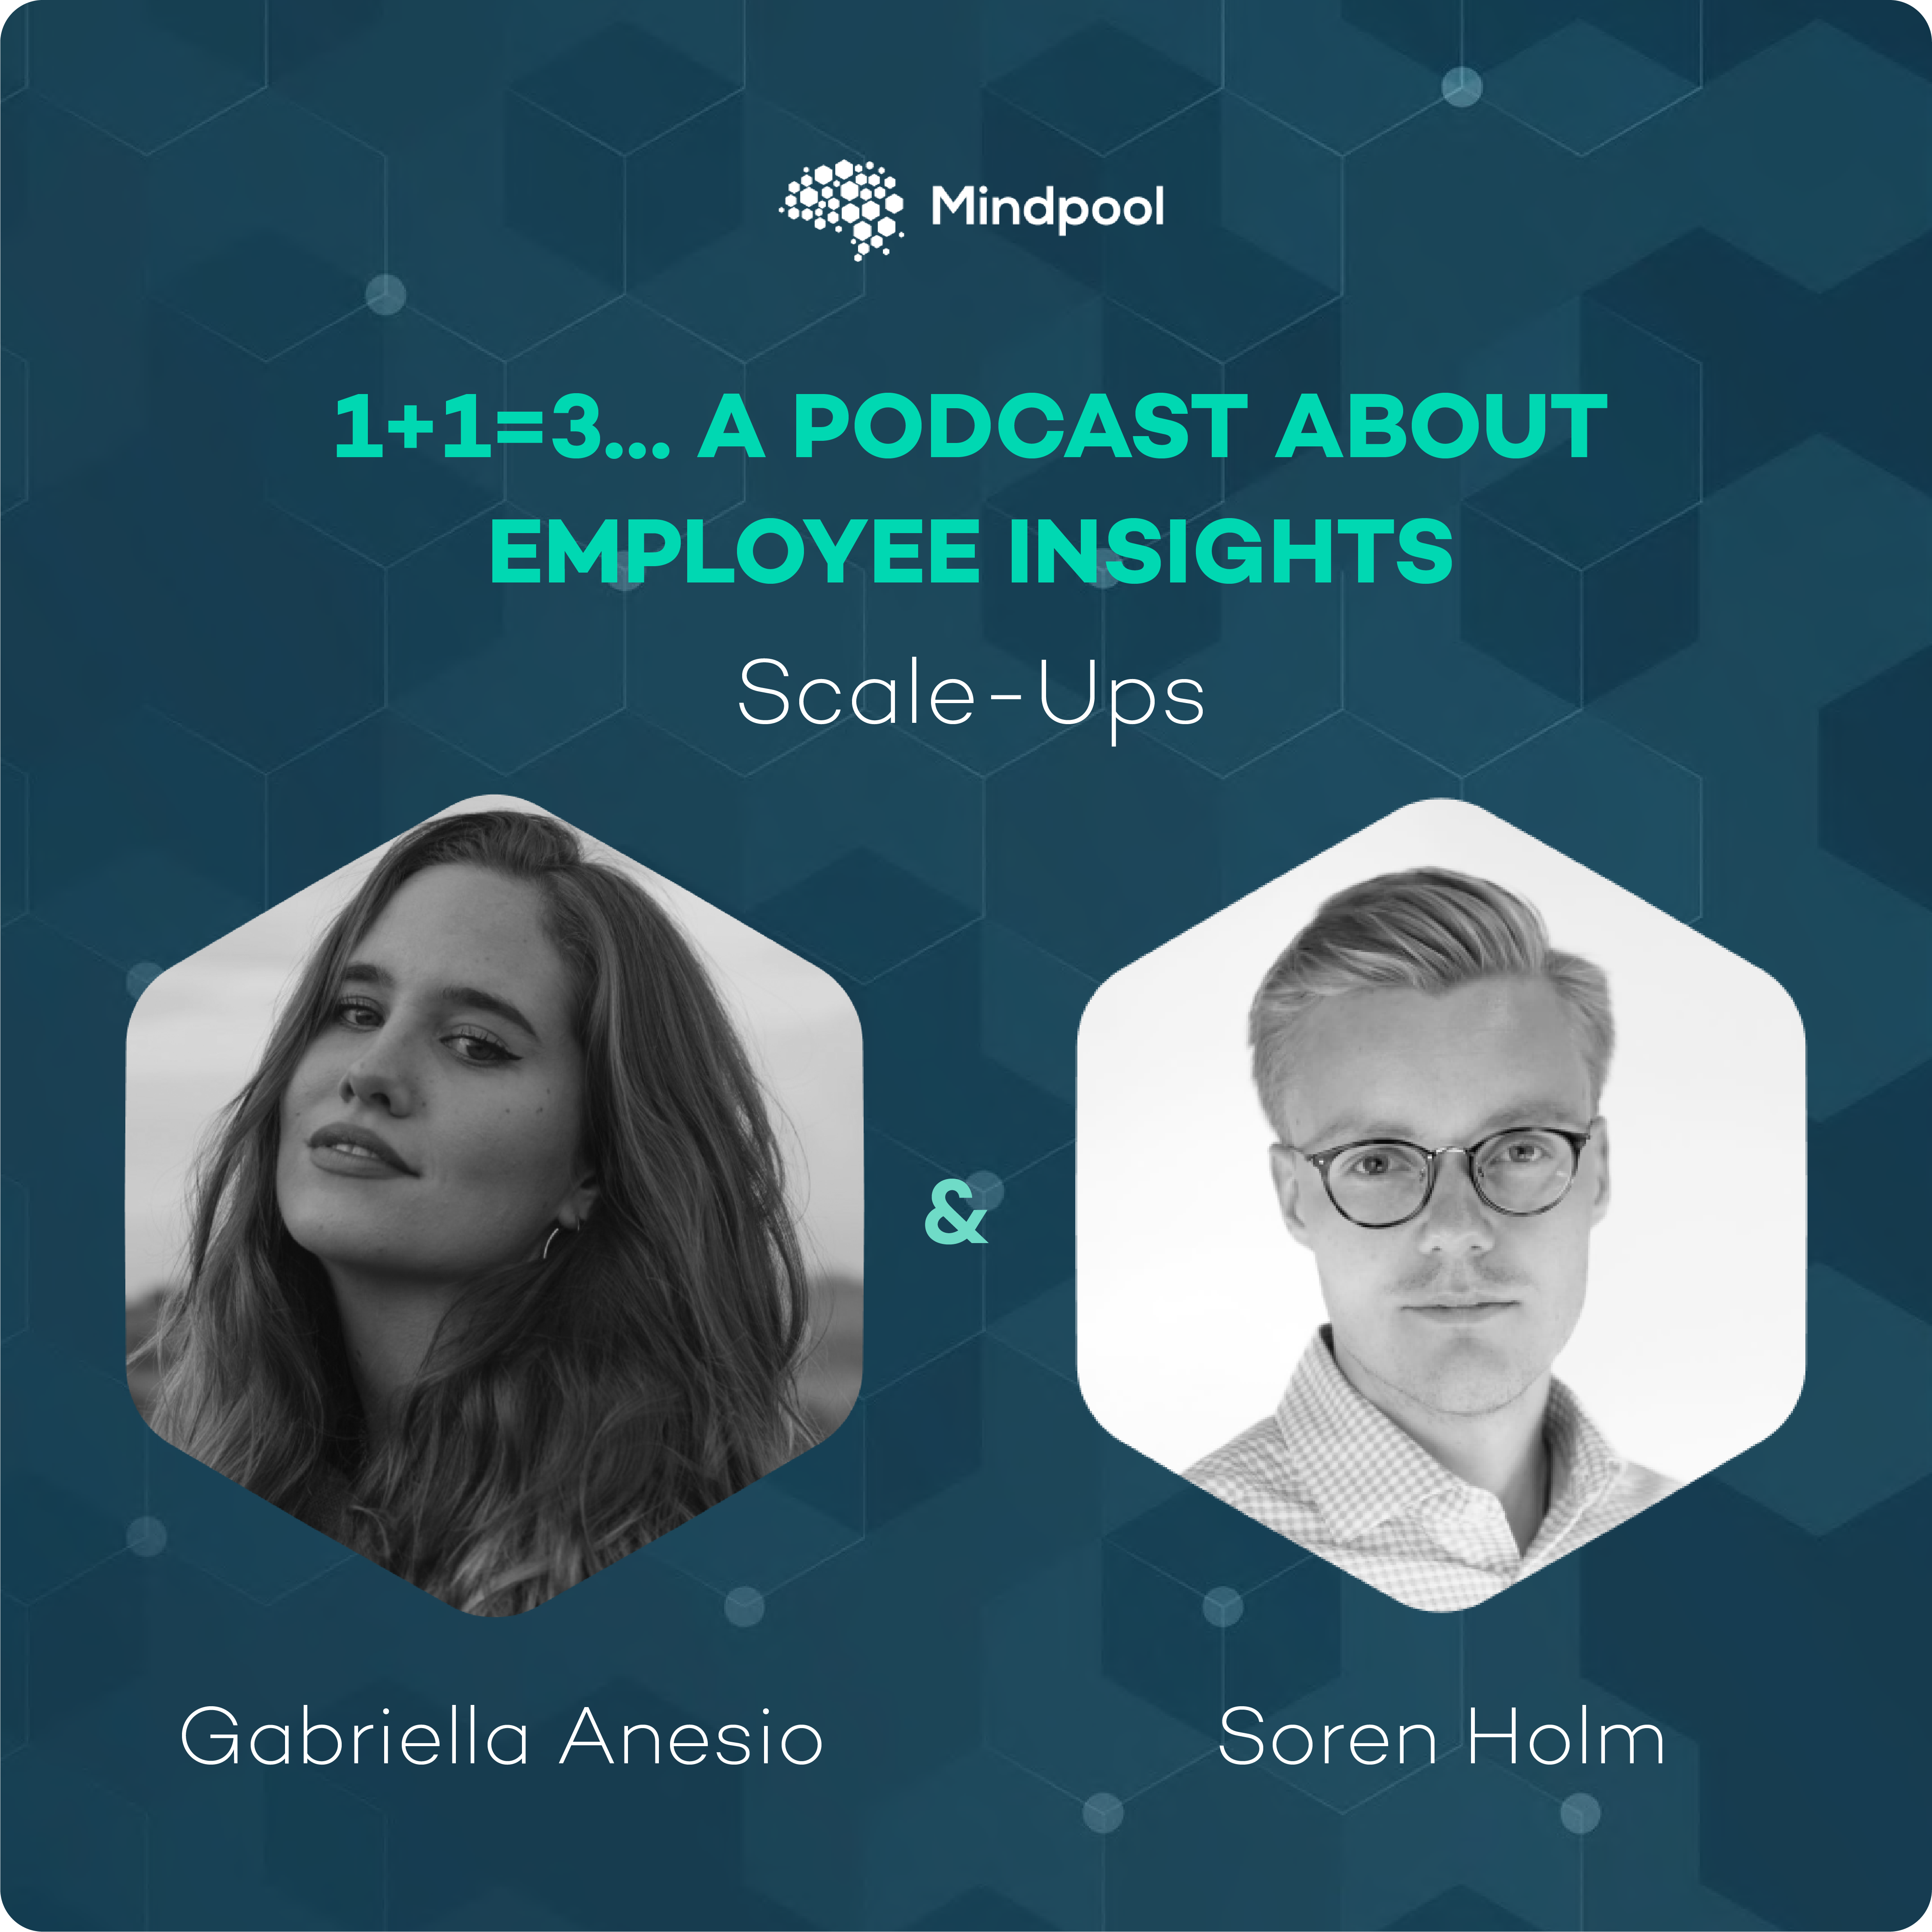 <p>1+1=3: A podcast about employee insights #1</p>